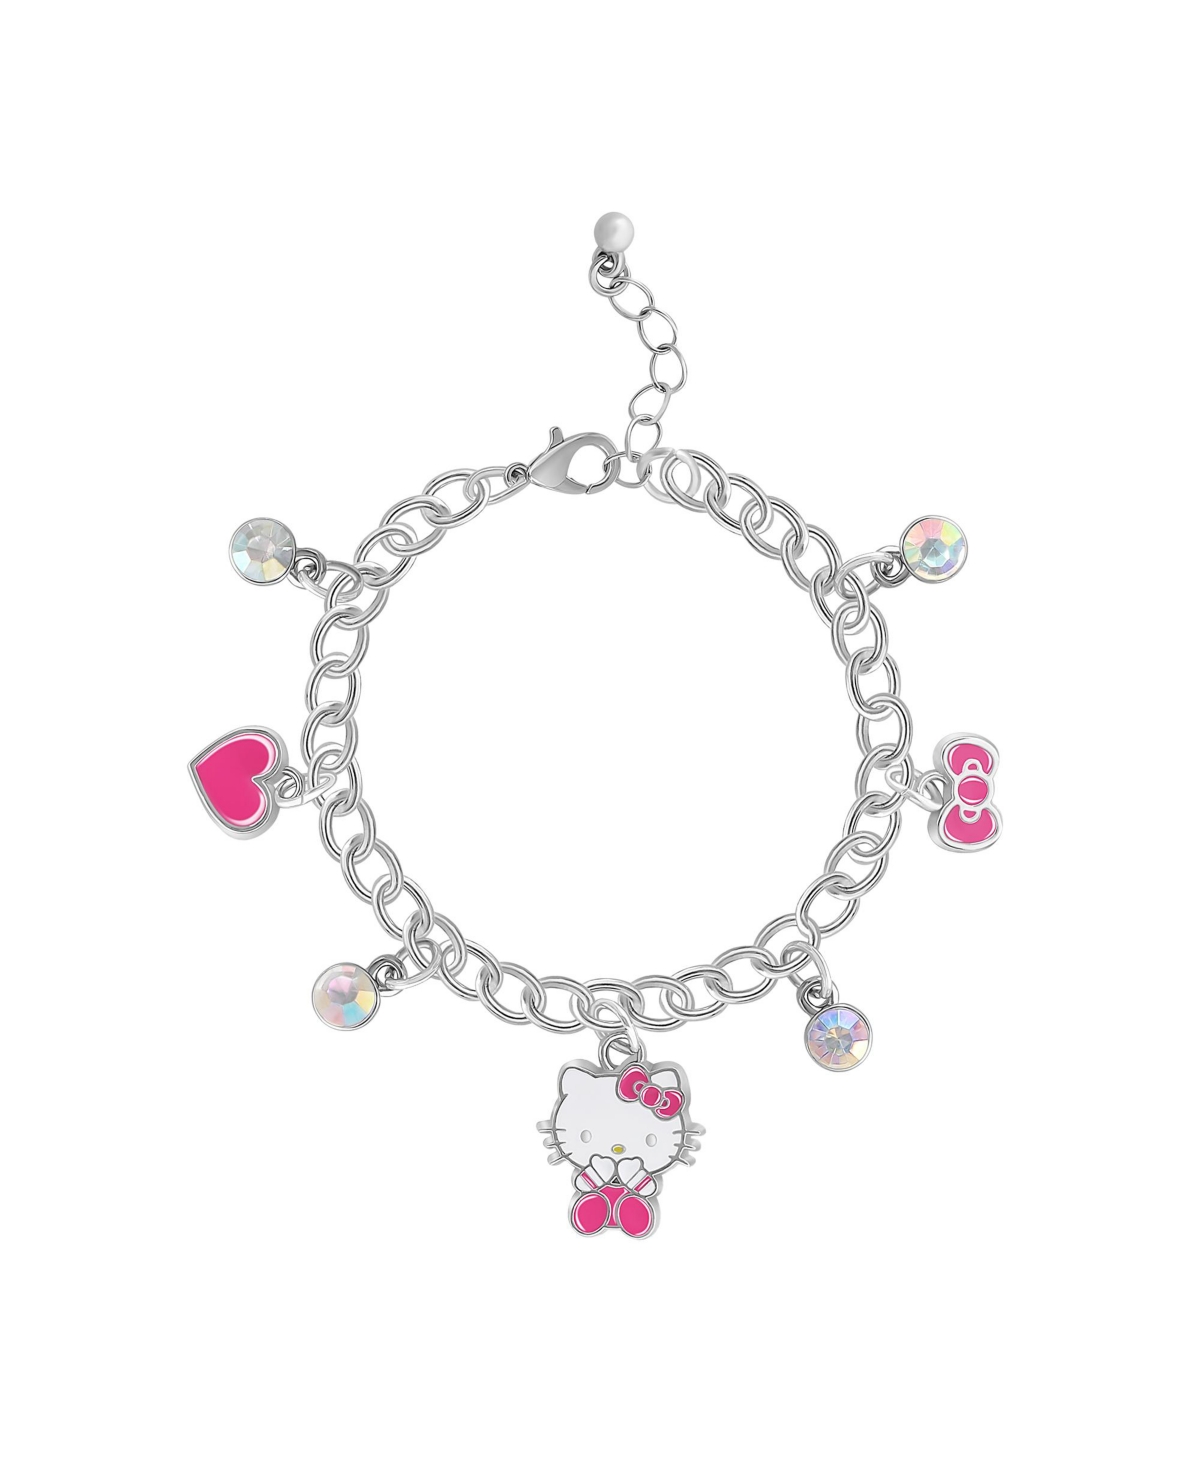 Sanrio Charm Hearts Bracelet - Officially Licensed, 6.5 + 1'' Chain - Silver tone, pink